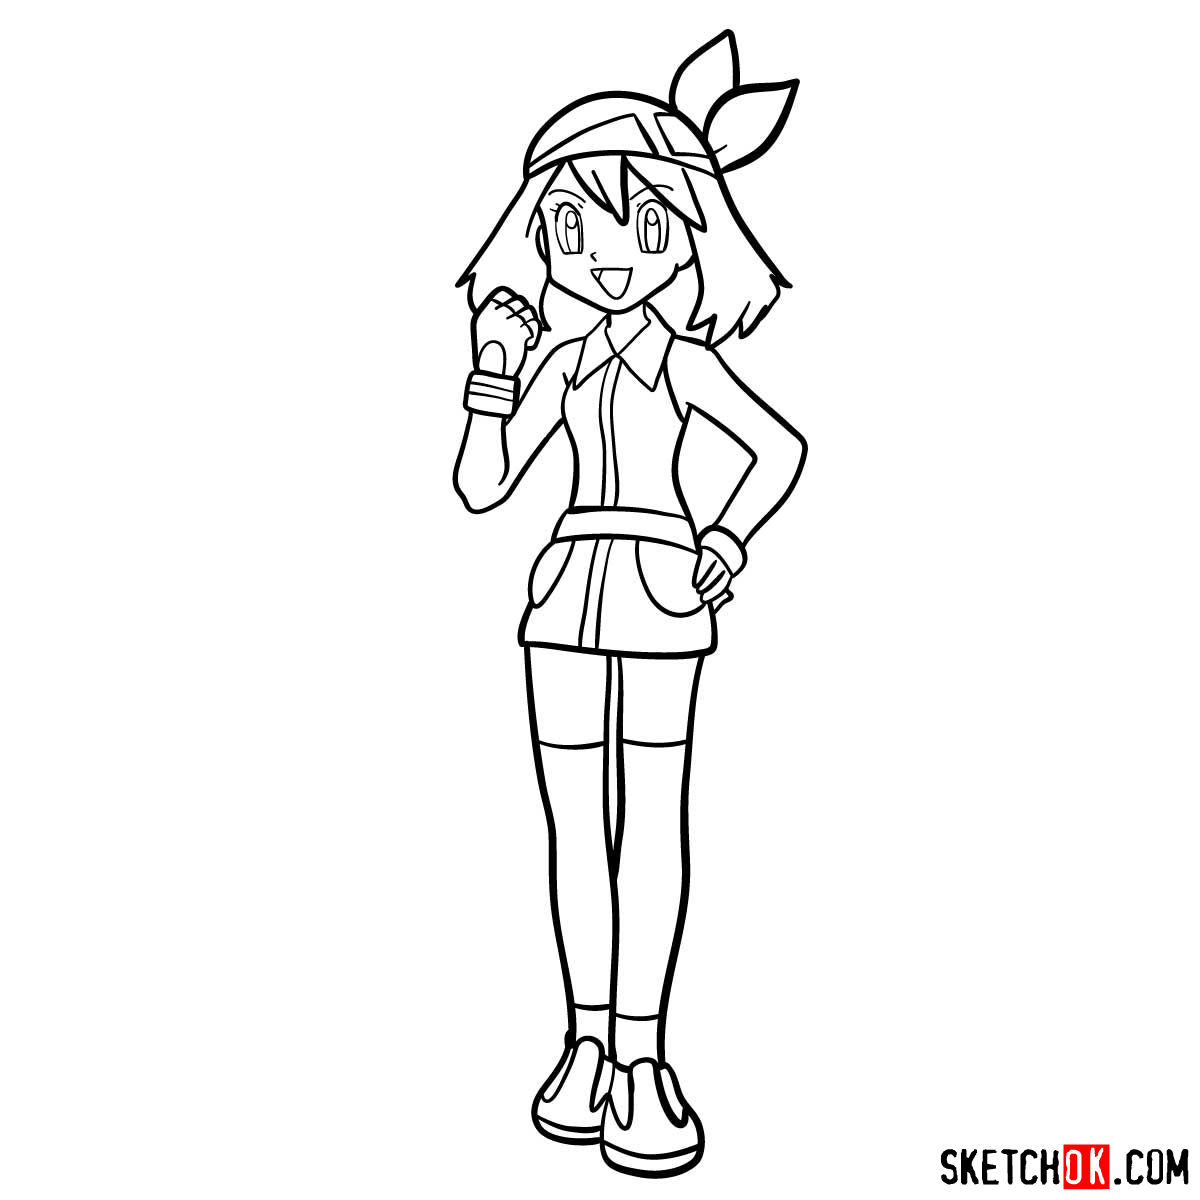 How to draw May from Pokemon anime - step 16